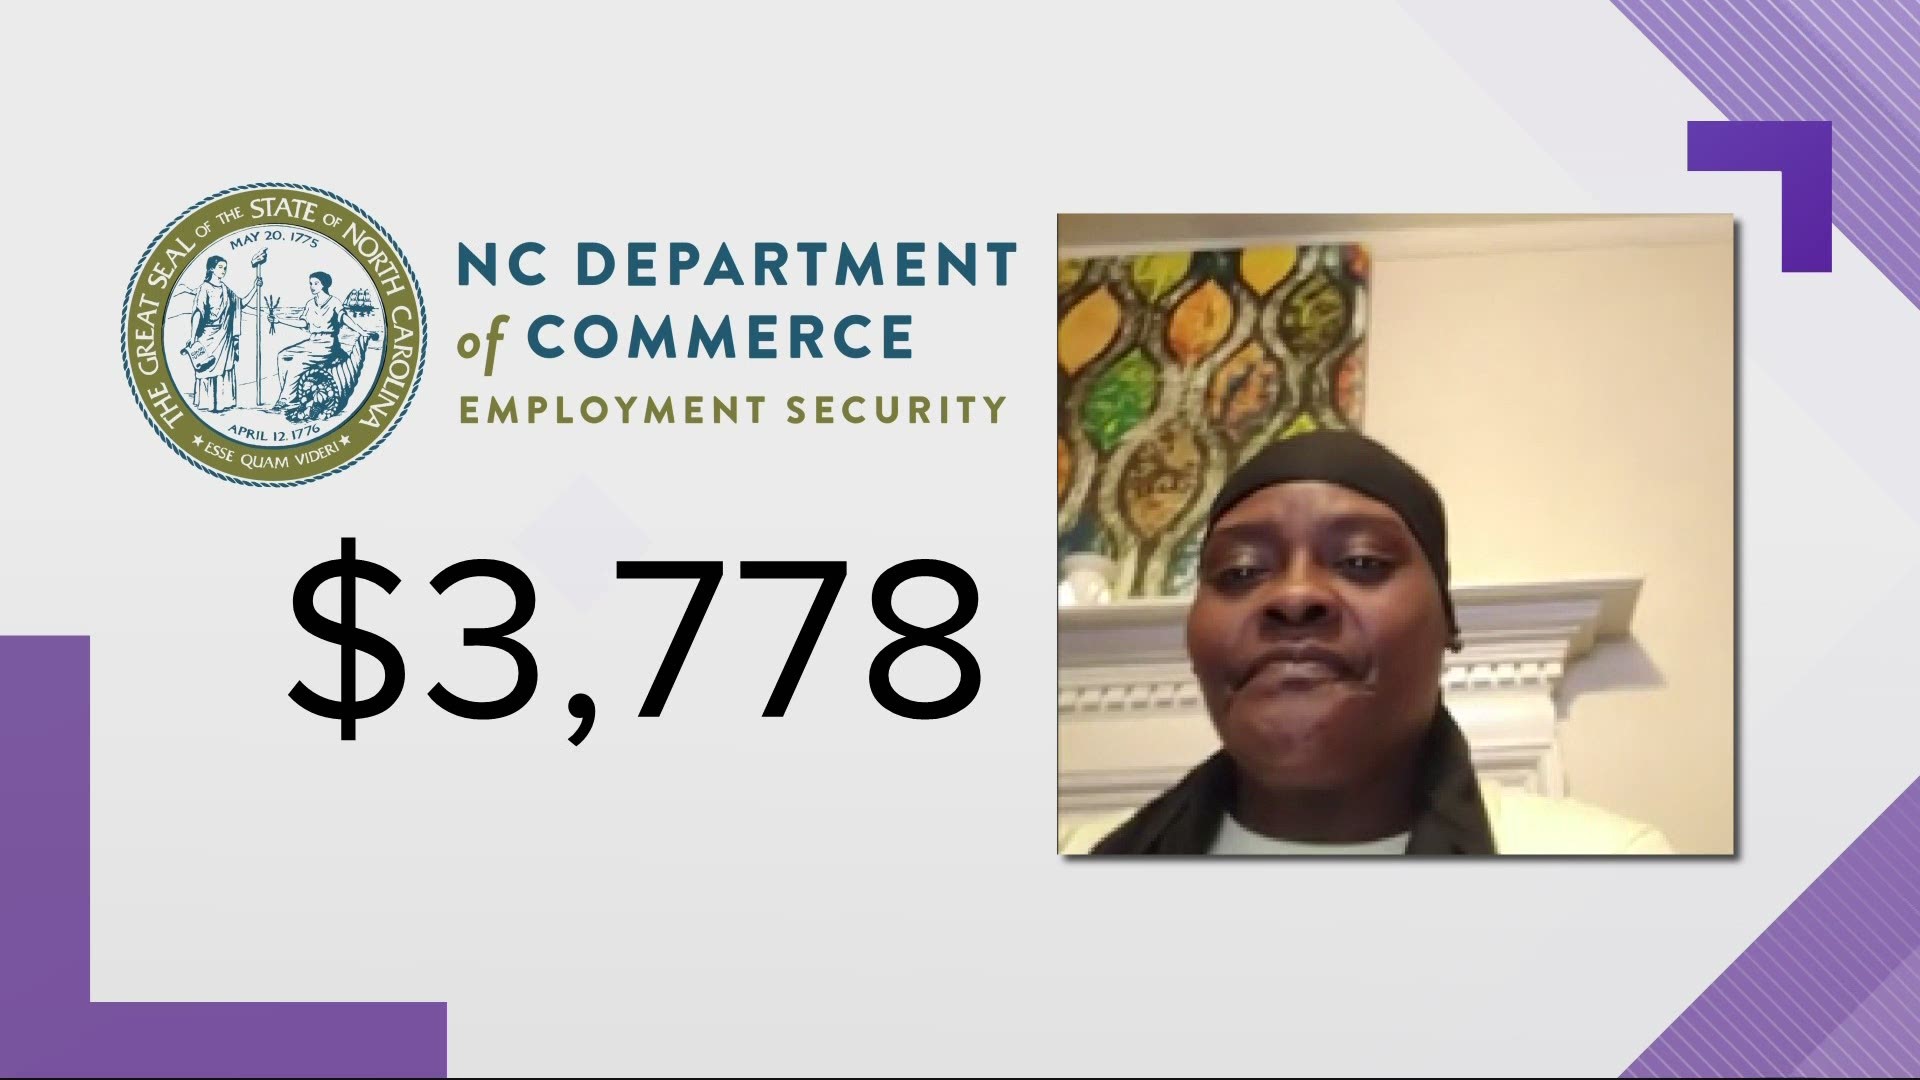 Tashka Muhammad said she was falling behind on her bills and was marked for cutoff.  Tashka emailed WCNC and the Defenders helped her get what she was owed.